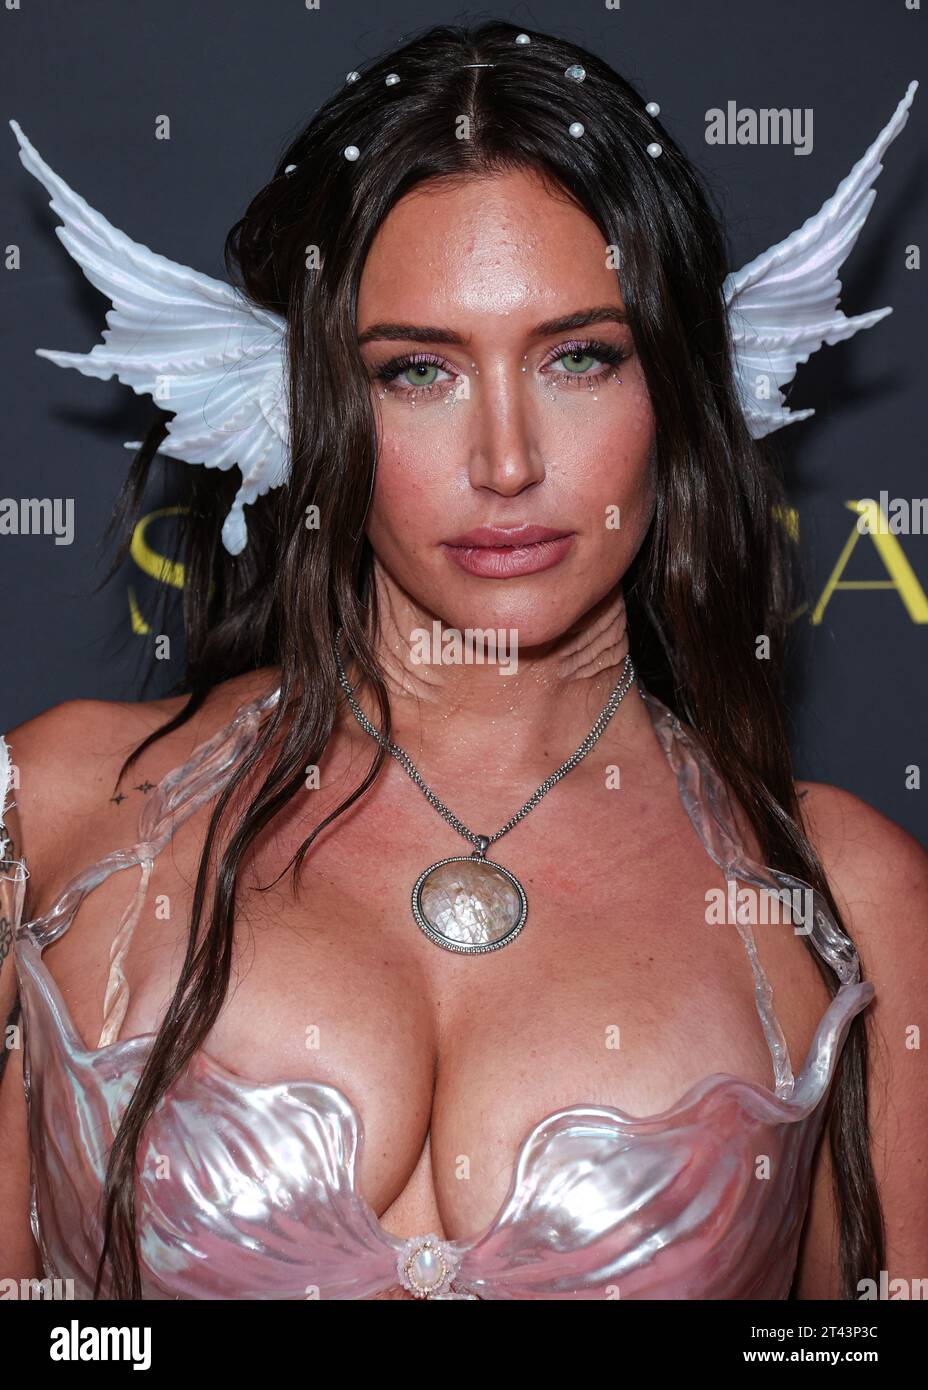 BEVERLY HILLS, LOS ANGELES, CALIFORNIA, USA - OCTOBER 27: Anastasia Karanikolaou (Stassie) arrives at Darren Dzienciol's Pop Icons Halloween Party 2023 Presented By Solisca Tequila and PATH Water held at a Private Residence on October 27, 2023 in Beverly Hills, Los Angeles, California, United States. (Photo by Xavier Collin/Image Press Agency) Stock Photo